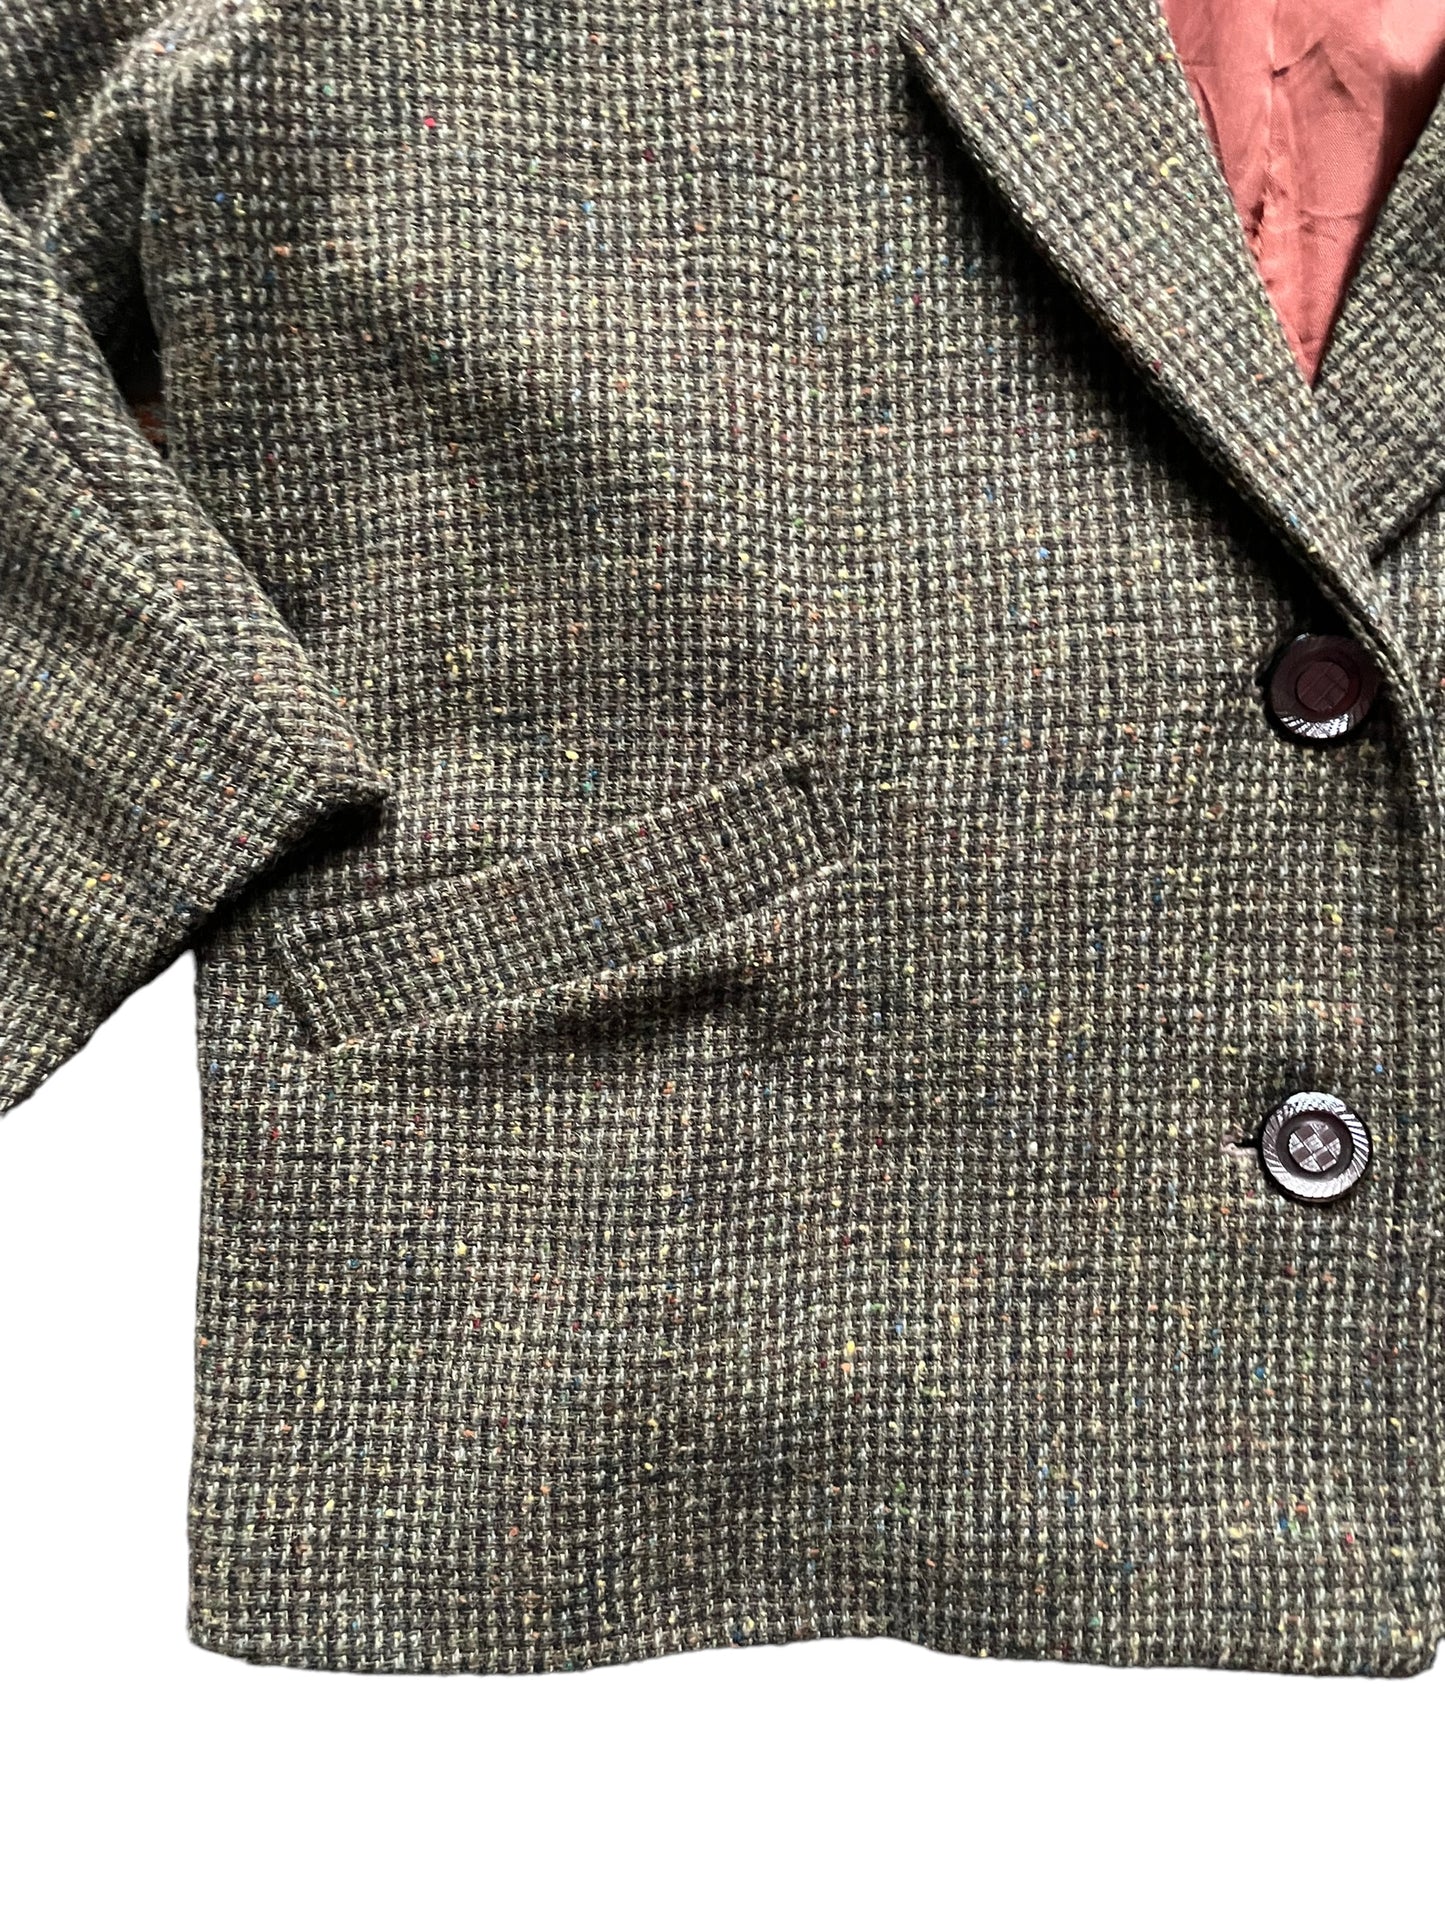 Front lower right view of Vintage 1940s Tweed Boxy Blazer SZ L | Seattle True Vintage | Barn Owl Vintage Coats